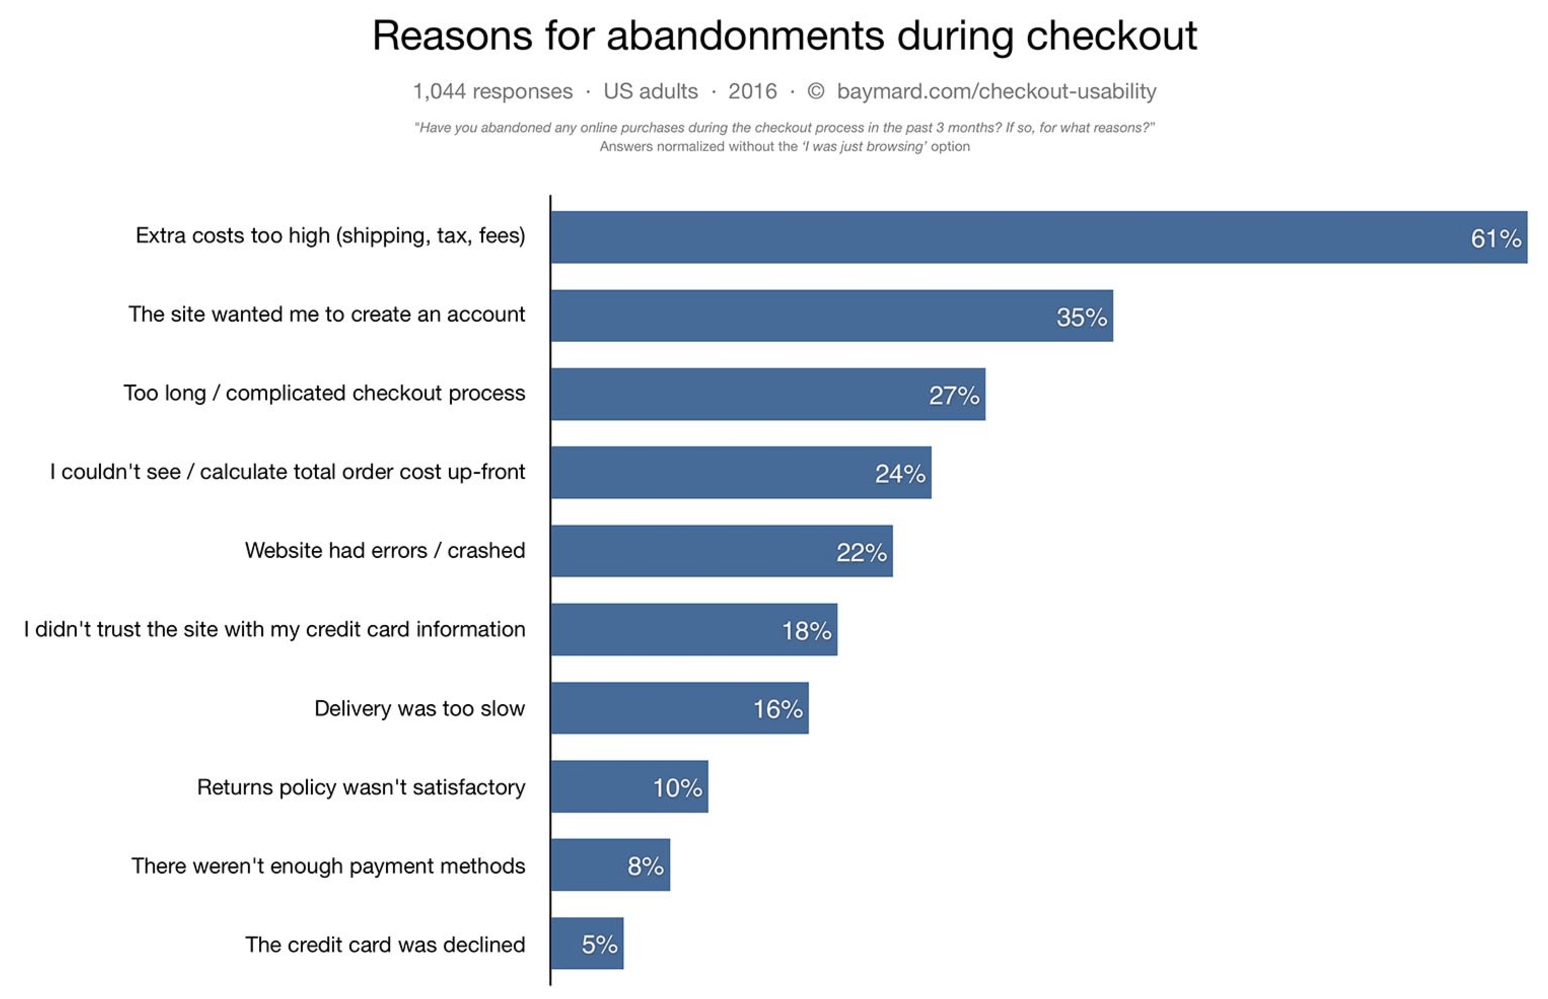 Reasons for eCommerce Shopping Cart Abandonment